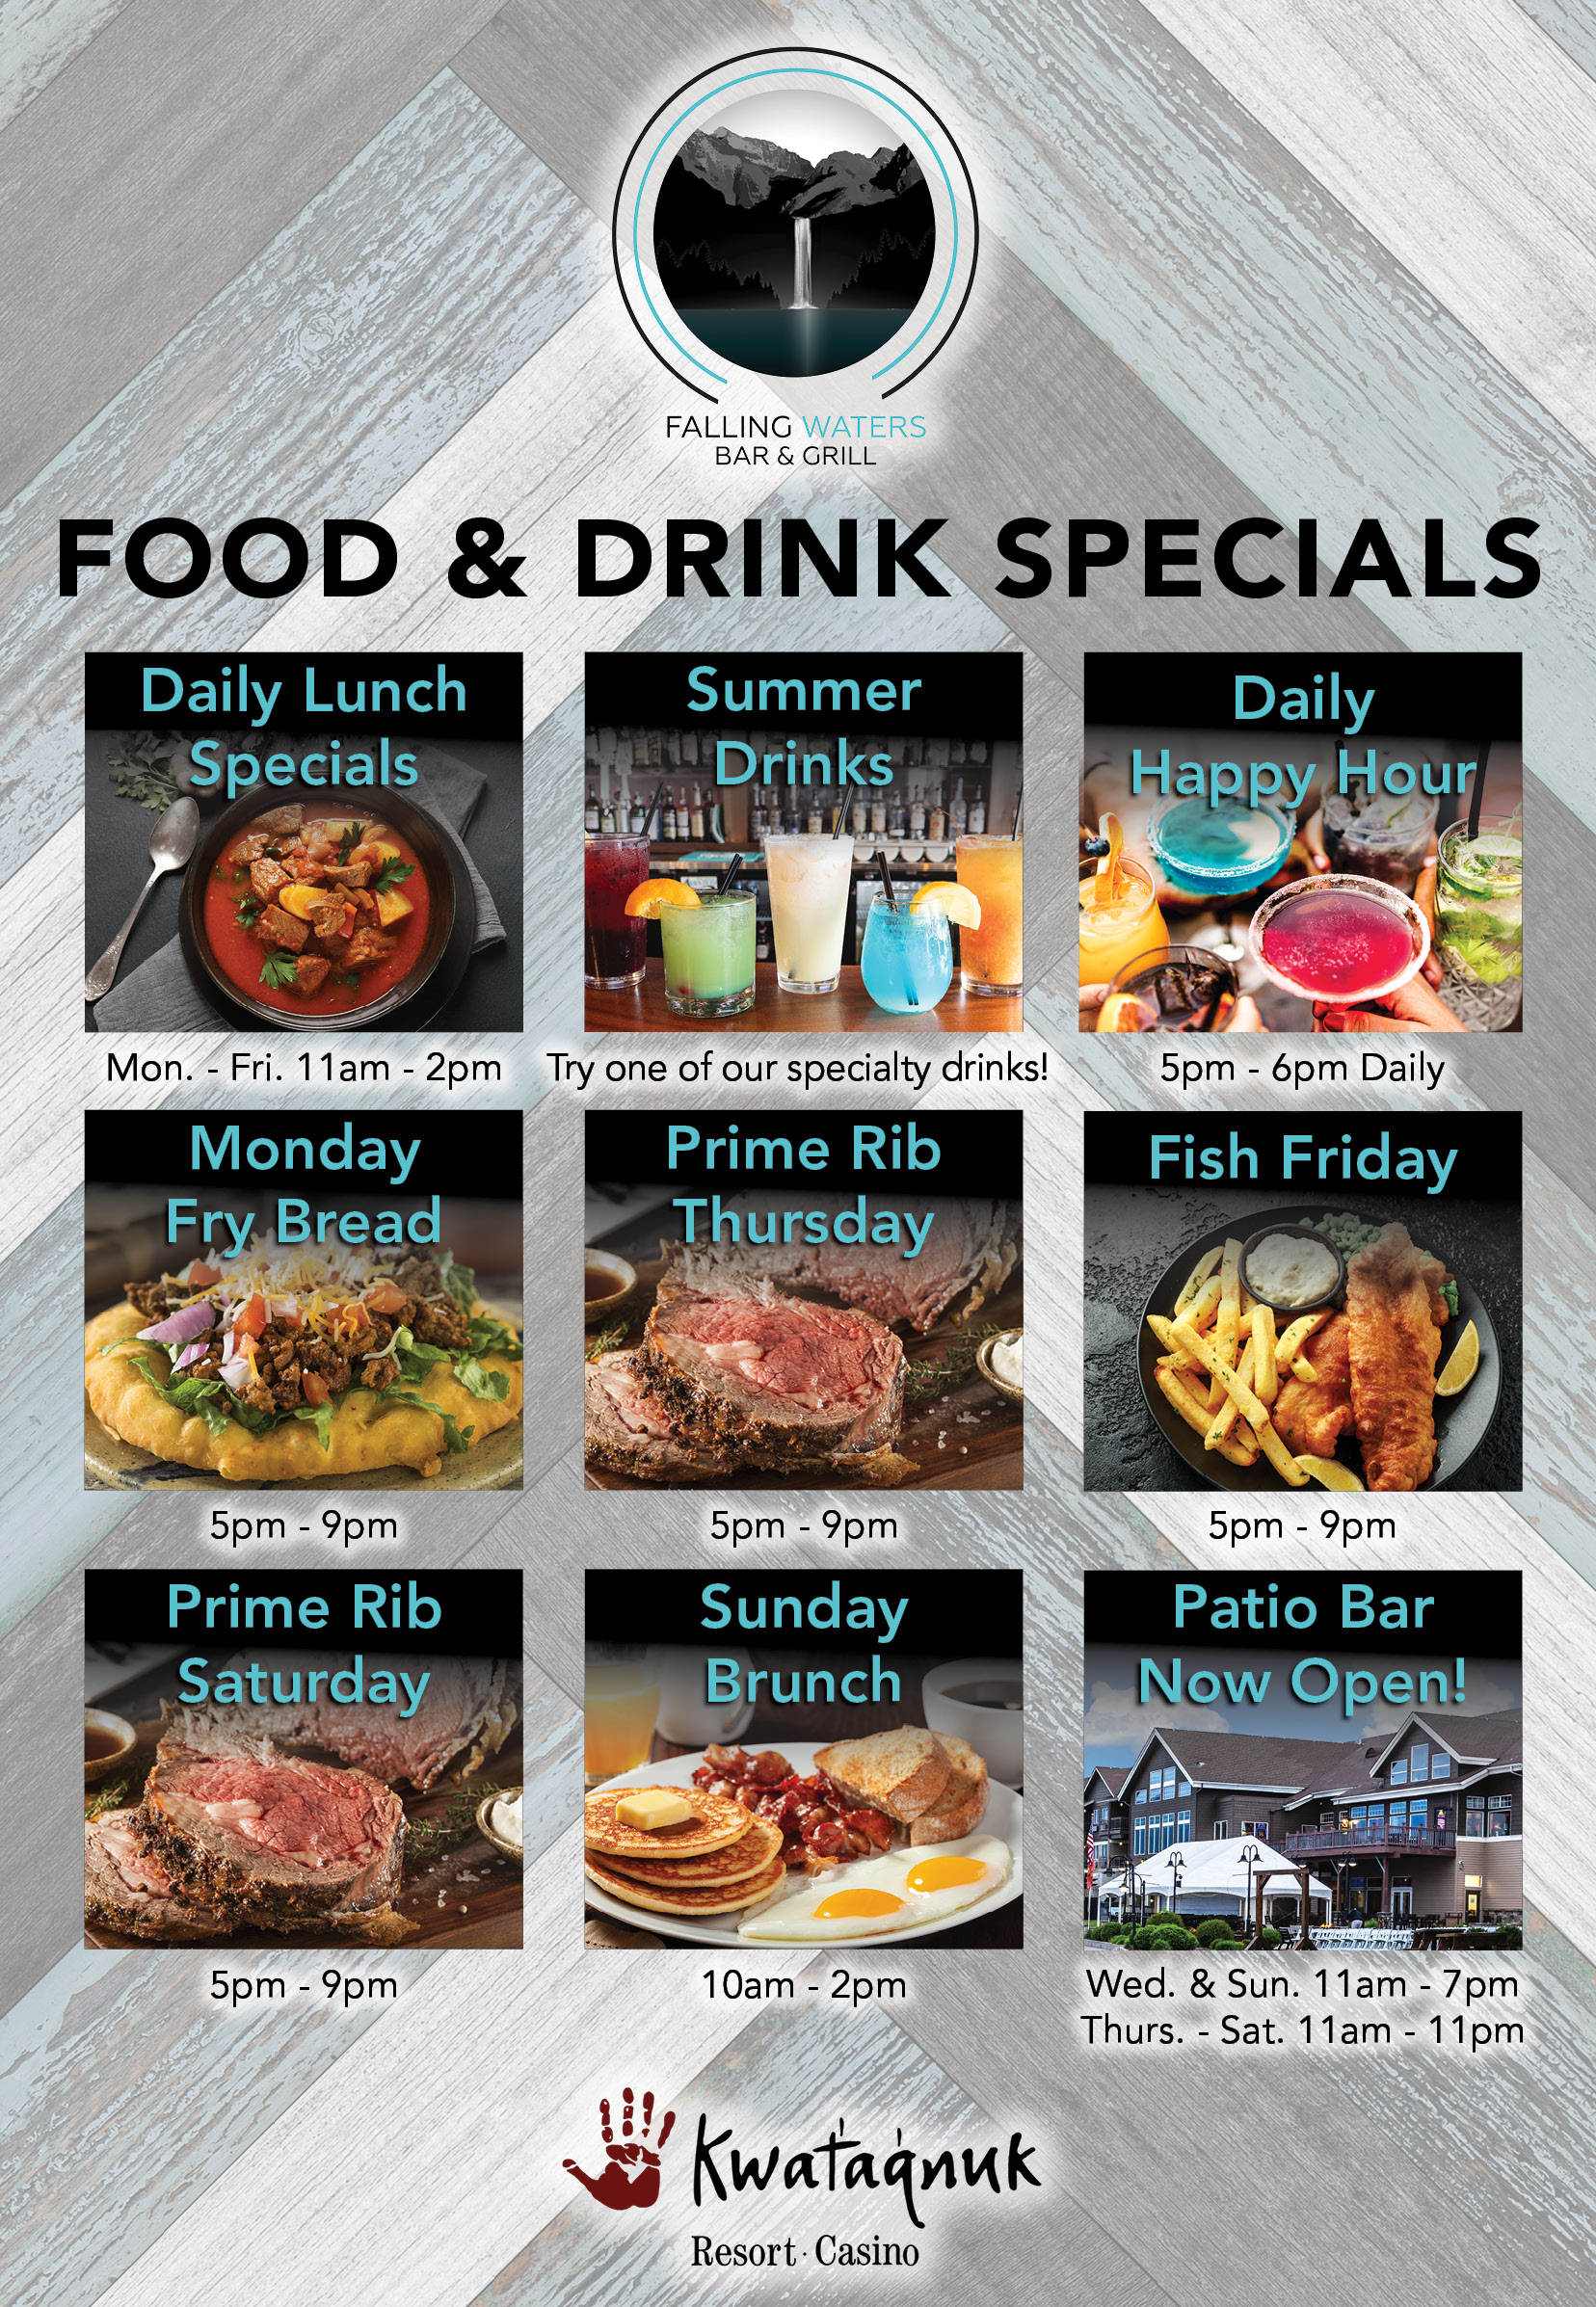 Food, drink, specials, daily specials, breakfast, lunch, dinner, happy hour, prime rib, brunch, food specials, drink specials, kids eat free